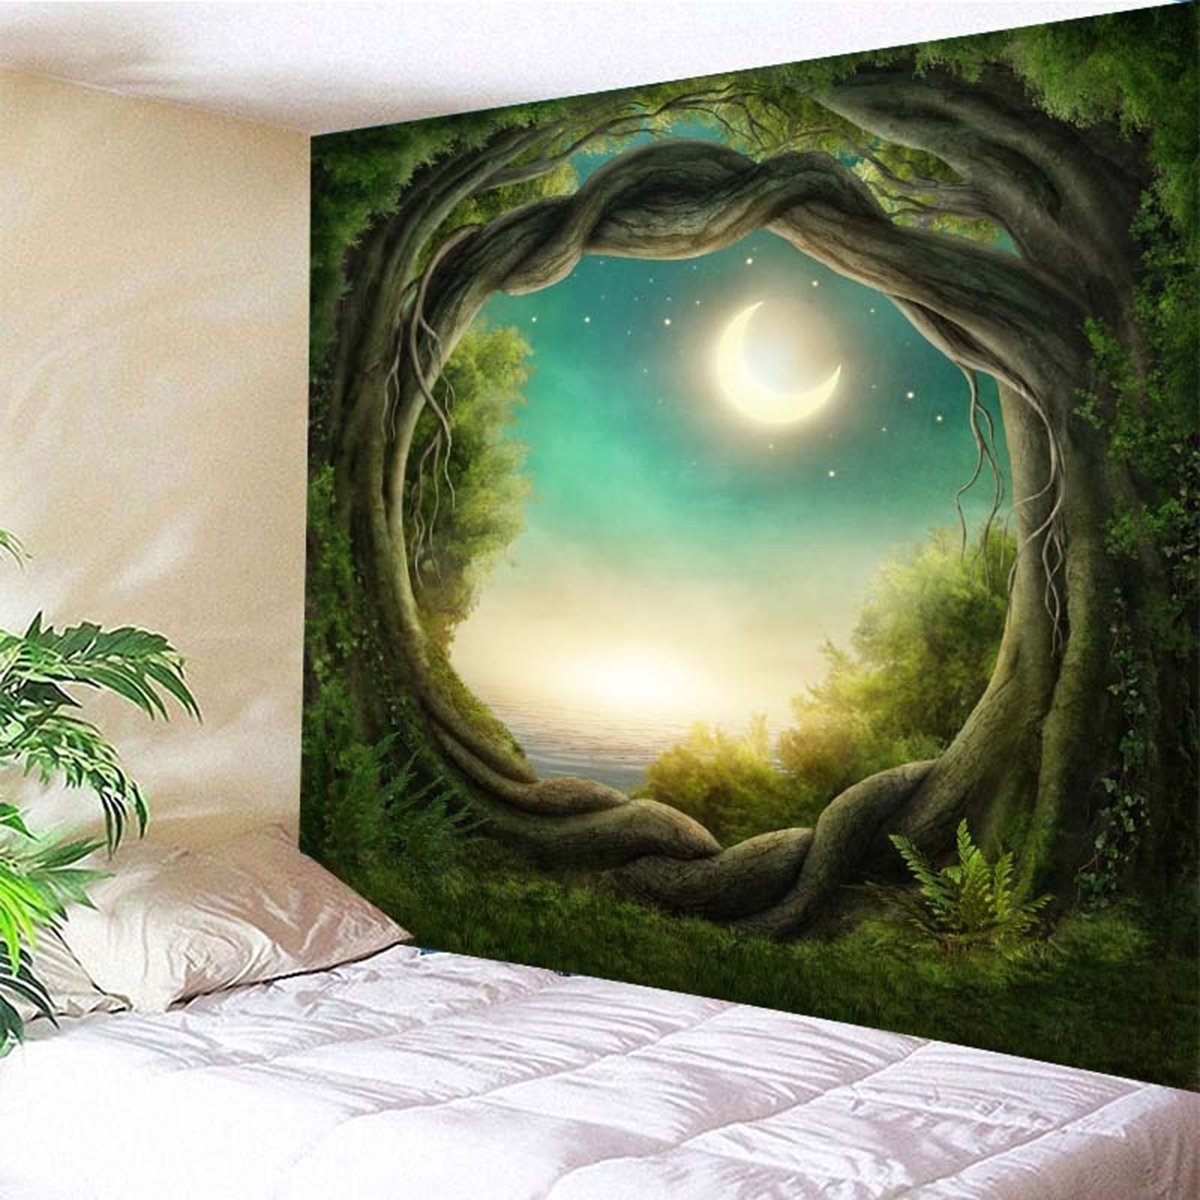 Fantasy-Forest-Tapestry-Wall-Hanging-Landscape-Wall-Tapestry-Home-Decoration-Hanging-Painting-1899638-5